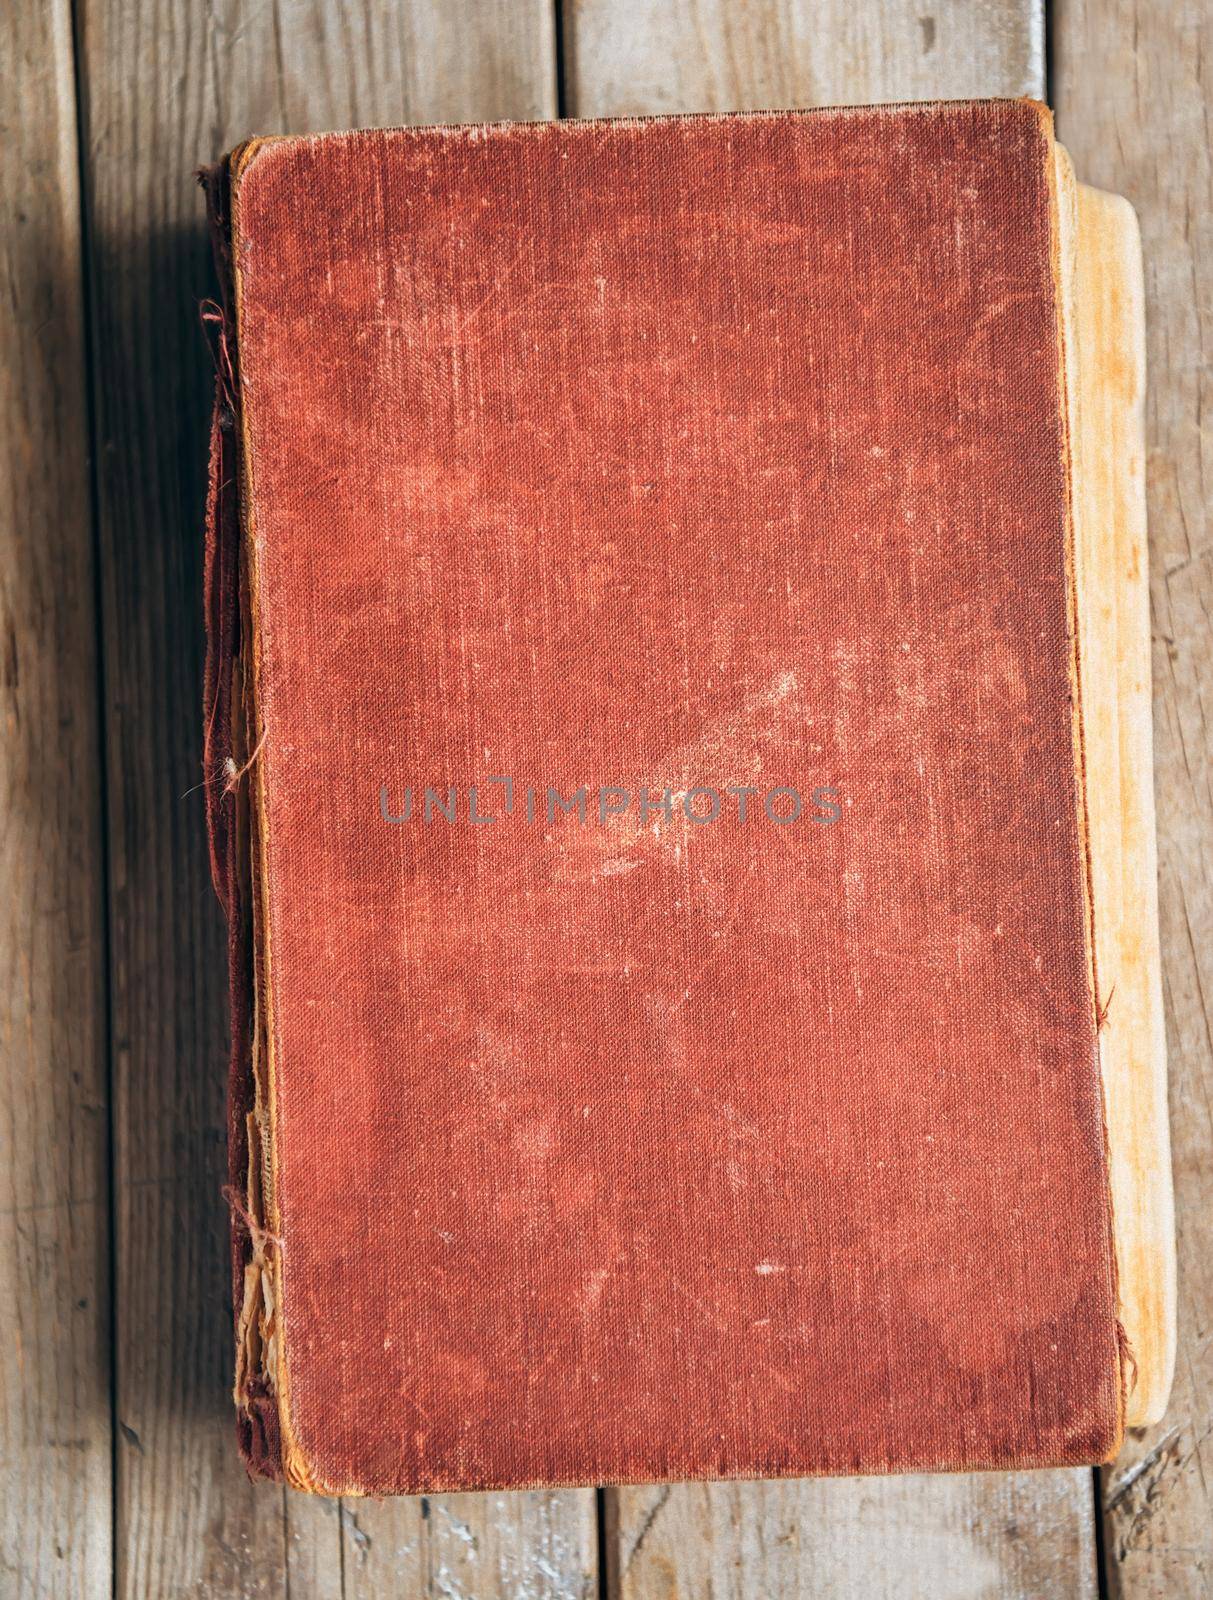 Vintage red book on a wooden table, space for text